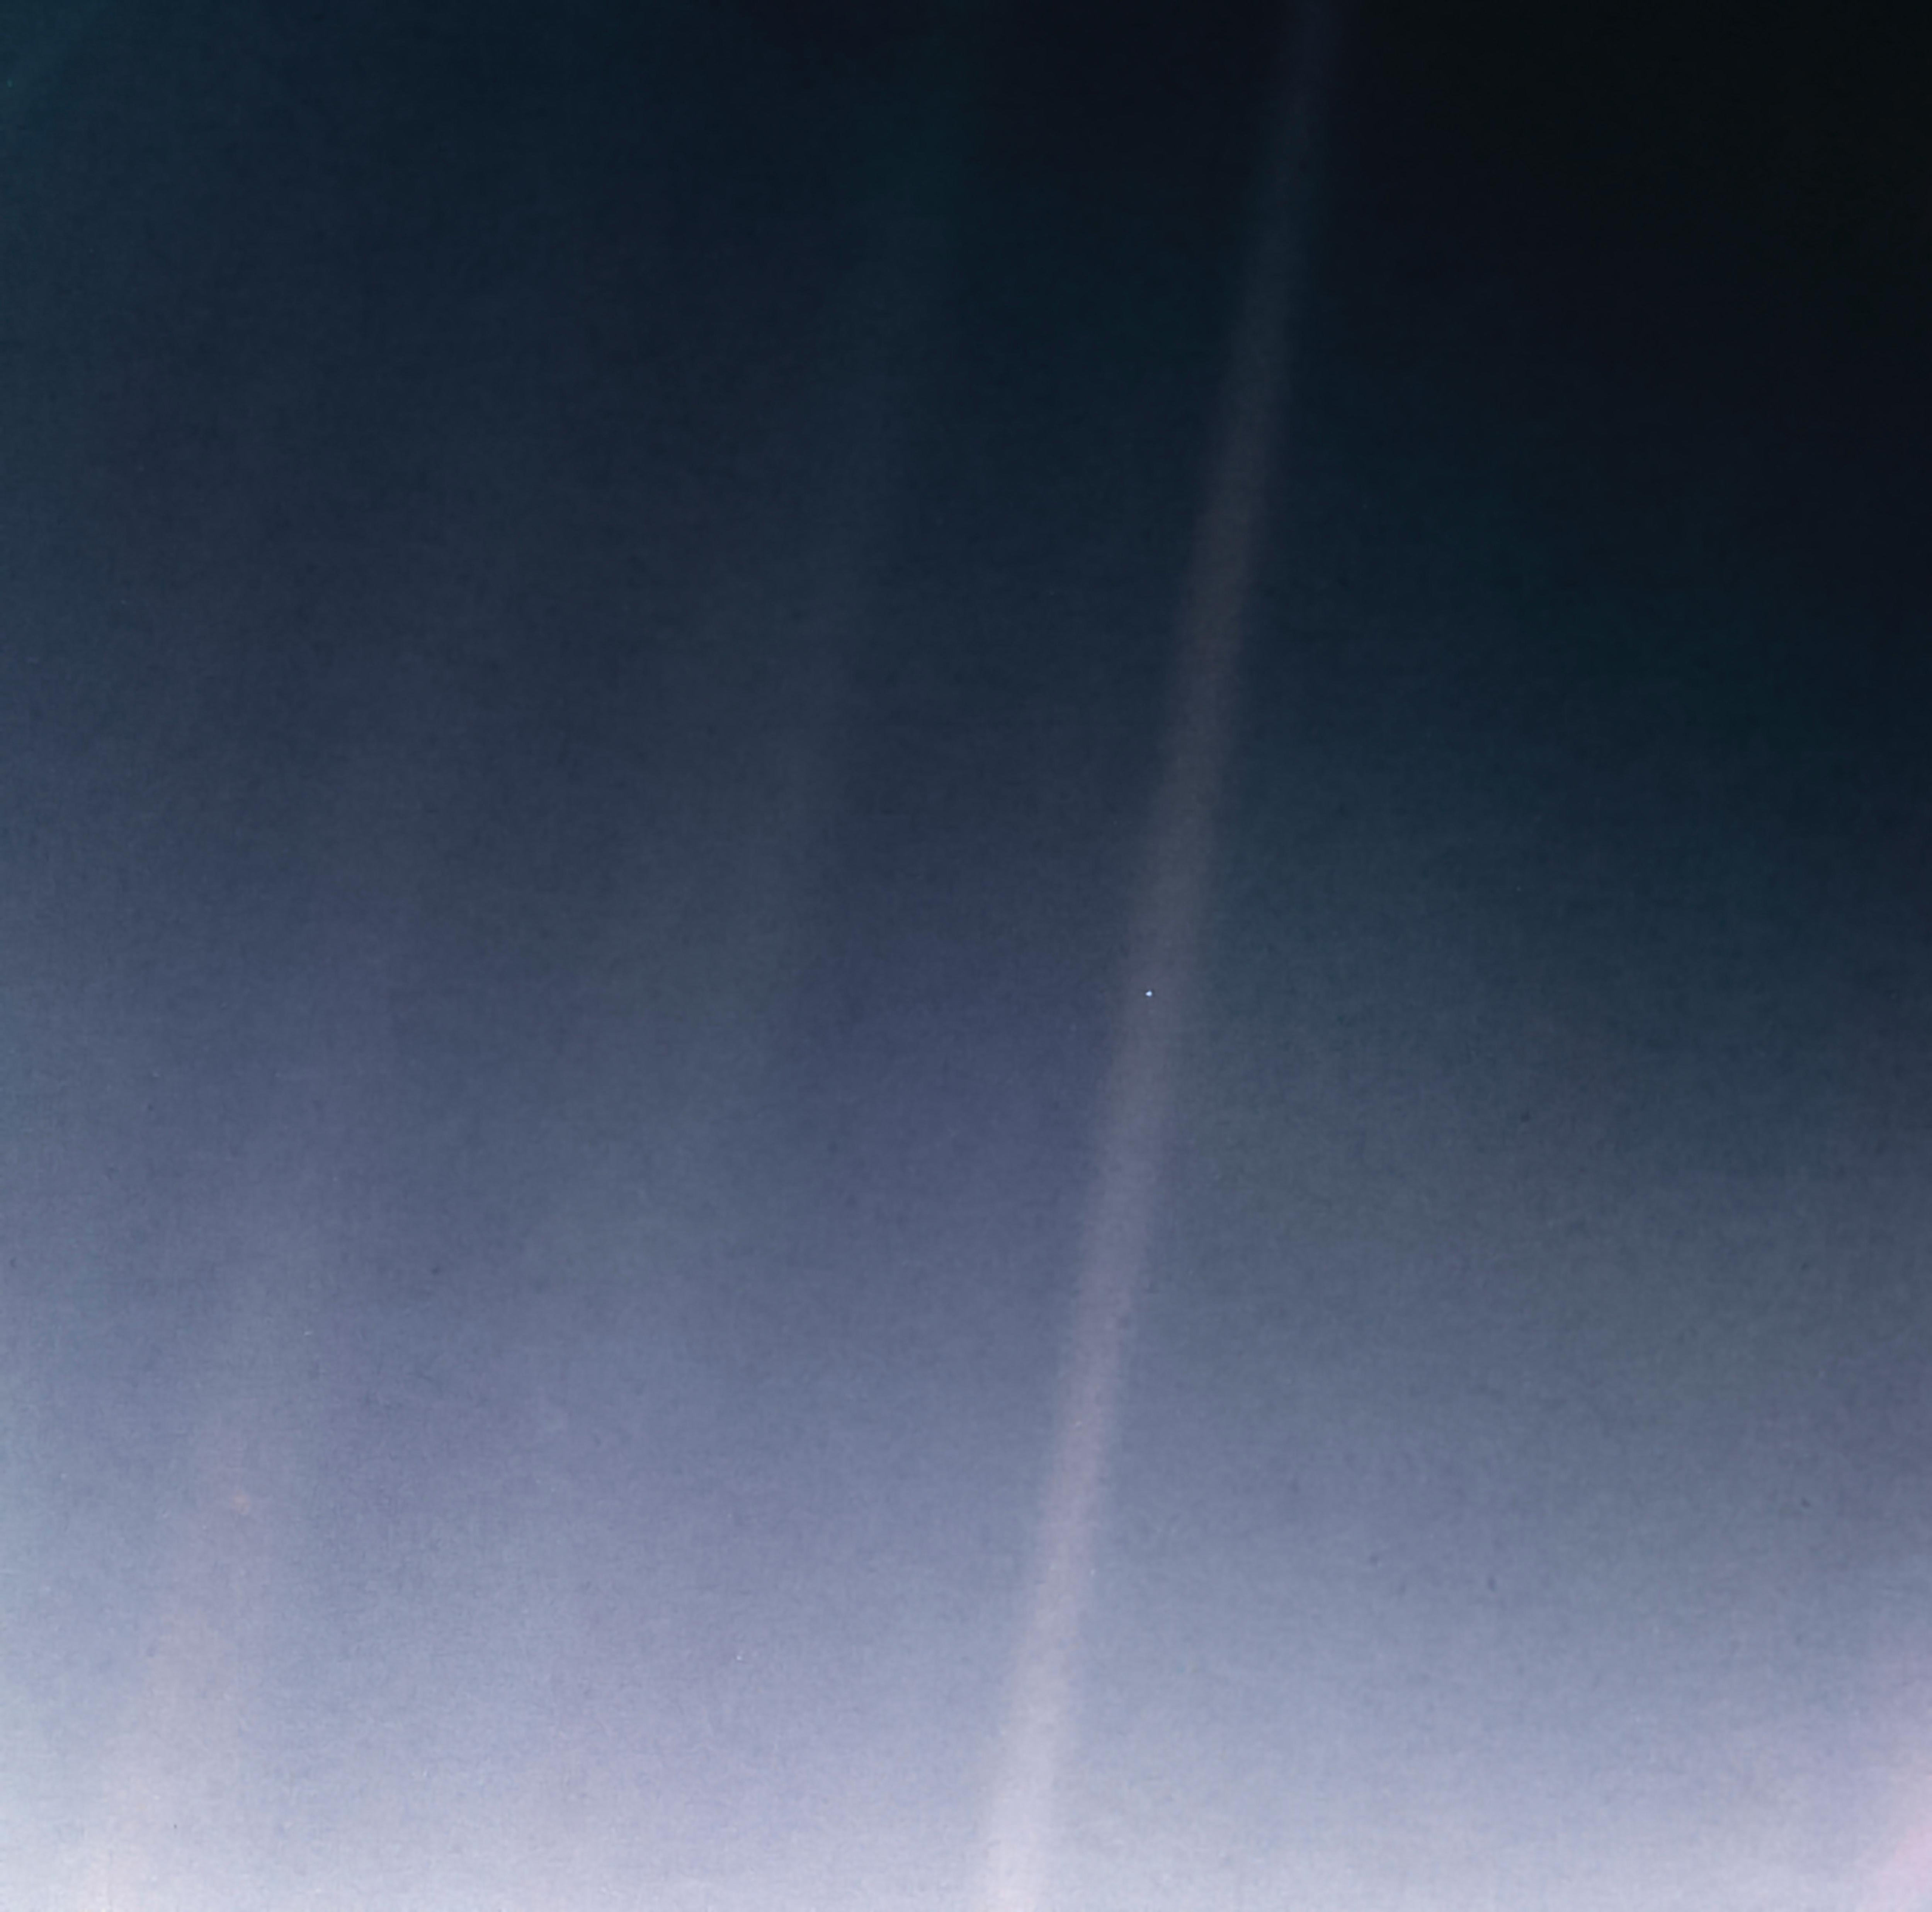 NASA Releases Remastered 'Pale Blue Dot' Image